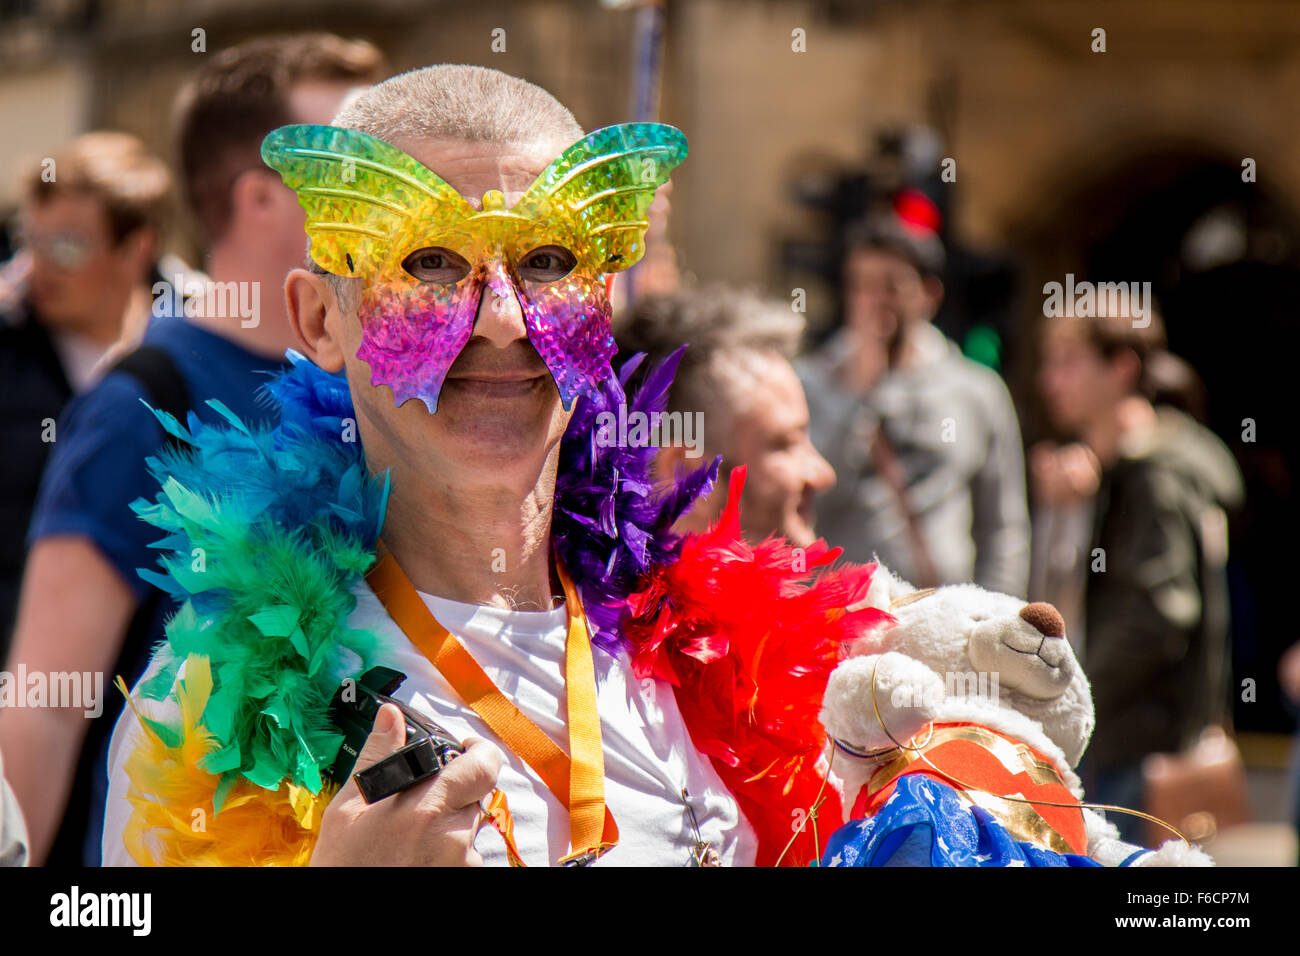 Flamboyant man with butterfly mask, garland and teddy bear. Stock Photo